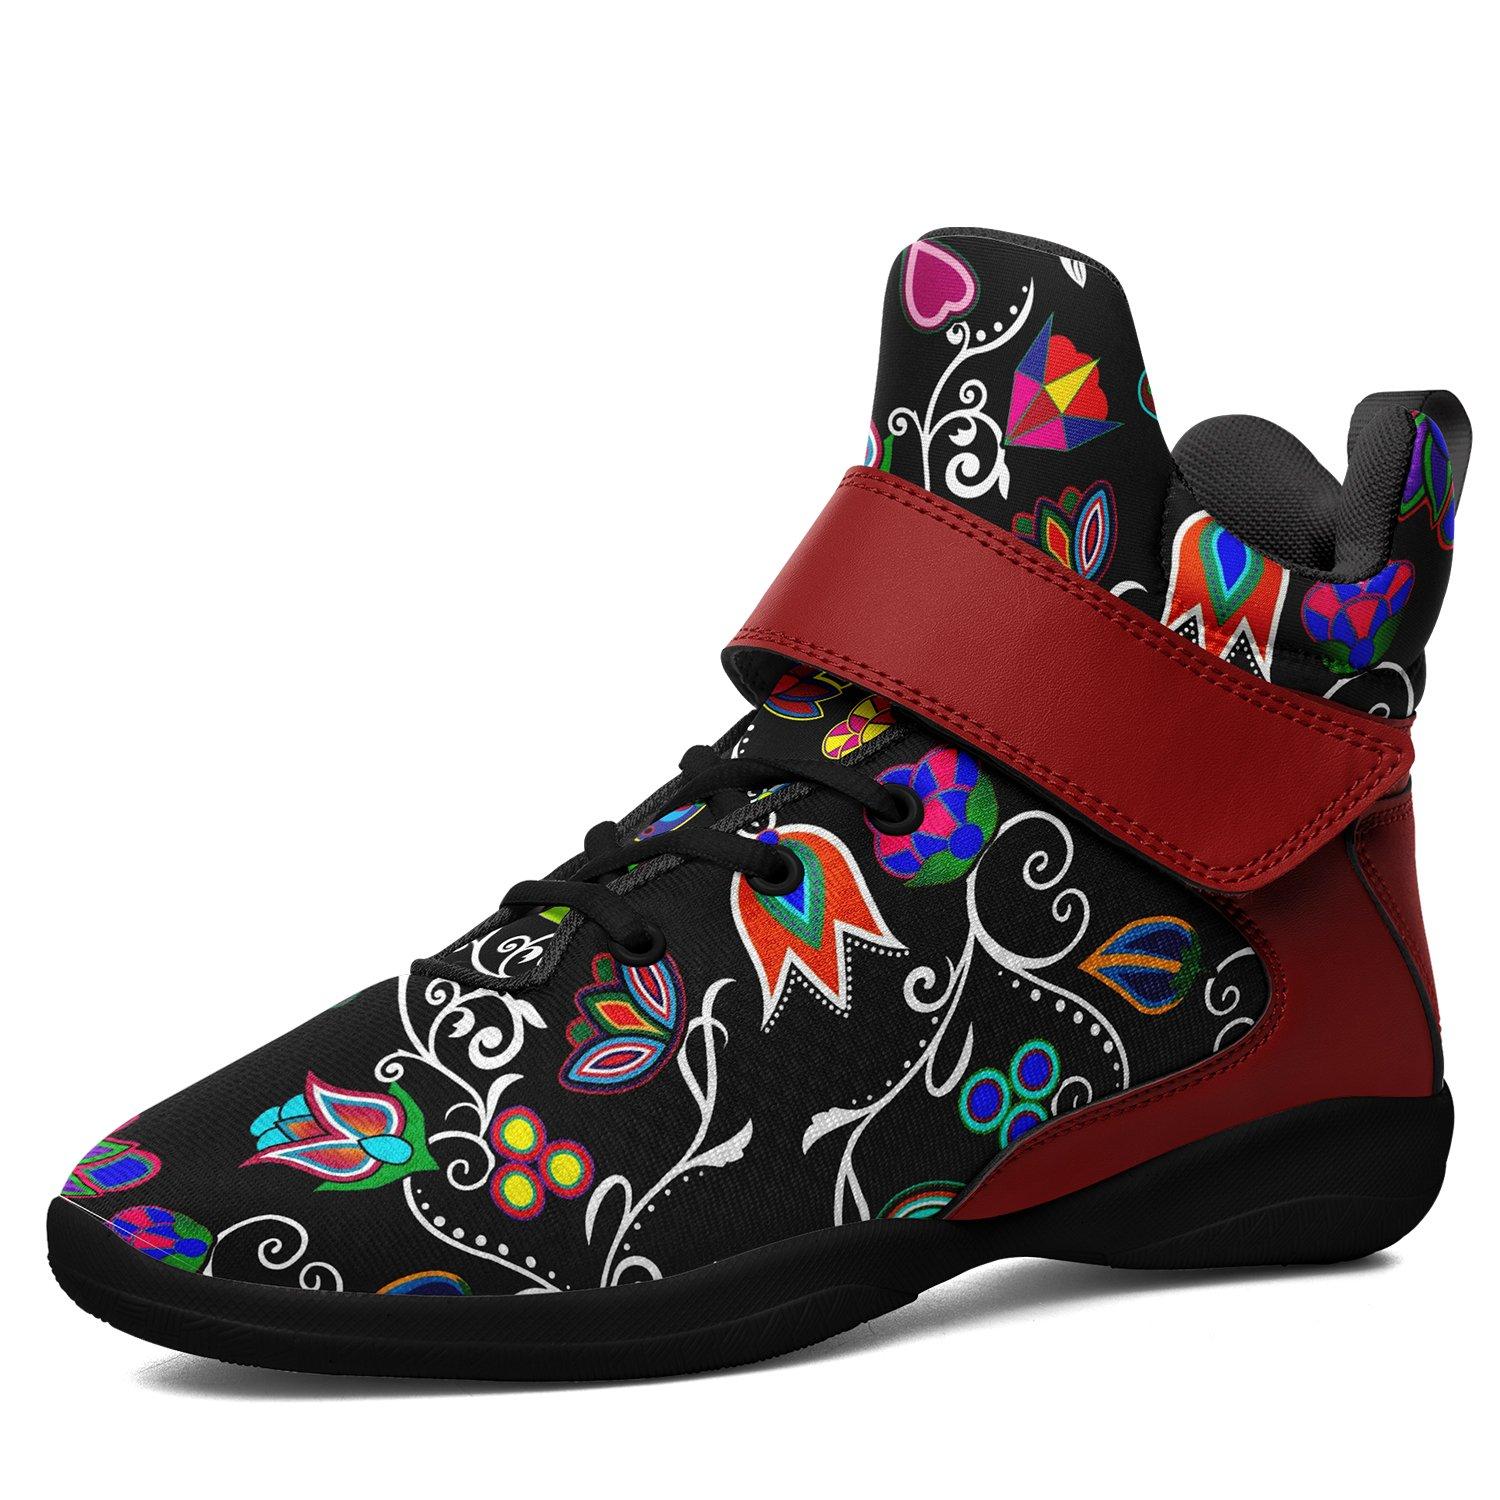 Indigenous Paisley Black Ipottaa Basketball / Sport High Top Shoes 49 Dzine US Women 4.5 / US Youth 3.5 / EUR 35 Black Sole with Dark Red Strap 